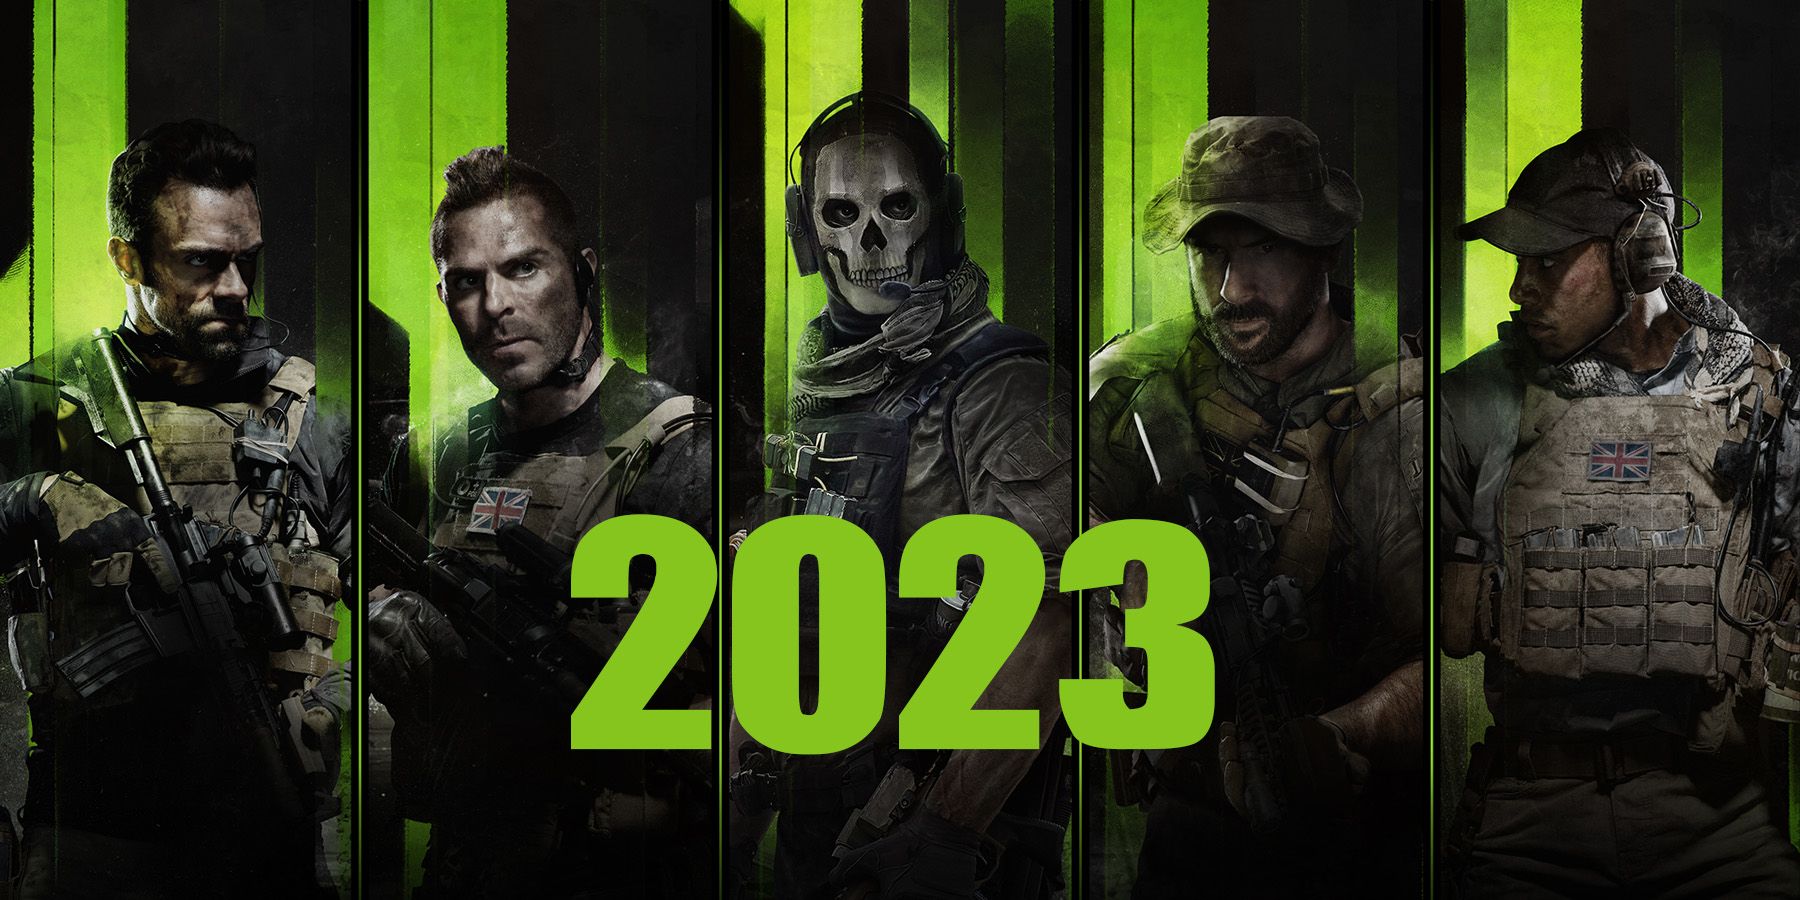 Call of duty modern warfare 2 artwork featuring the game's heroes with the number 2023 superimposed at the bottom center